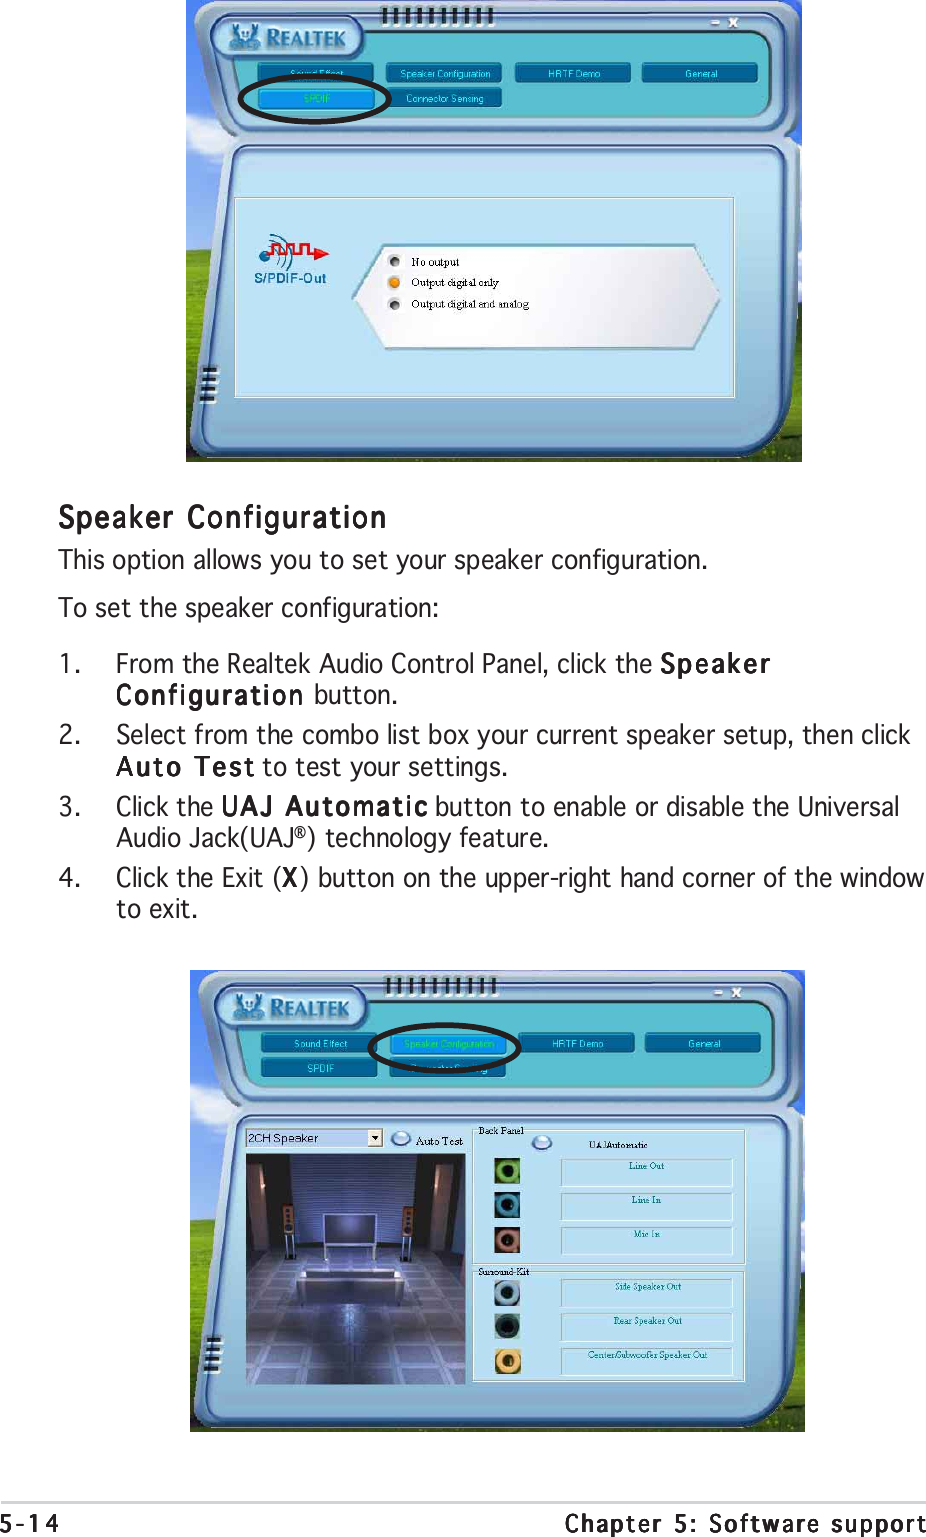 5-145-145-145-145-14 Chapter 5: Software supportChapter 5: Software supportChapter 5: Software supportChapter 5: Software supportChapter 5: Software supportSpeaker ConfigurationSpeaker ConfigurationSpeaker ConfigurationSpeaker ConfigurationSpeaker ConfigurationThis option allows you to set your speaker configuration.To set the speaker configuration:1. From the Realtek Audio Control Panel, click the SpeakerSpeakerSpeakerSpeakerSpeakerConfiguration Configuration Configuration Configuration Configuration button.2. Select from the combo list box your current speaker setup, then clickAuto TestAuto TestAuto TestAuto TestAuto Test to test your settings.3. Click the UAJ AutomaticUAJ AutomaticUAJ AutomaticUAJ AutomaticUAJ Automatic button to enable or disable the UniversalAudio Jack(UAJ®) technology feature.4. Click the Exit (XXXXX) button on the upper-right hand corner of the windowto exit.